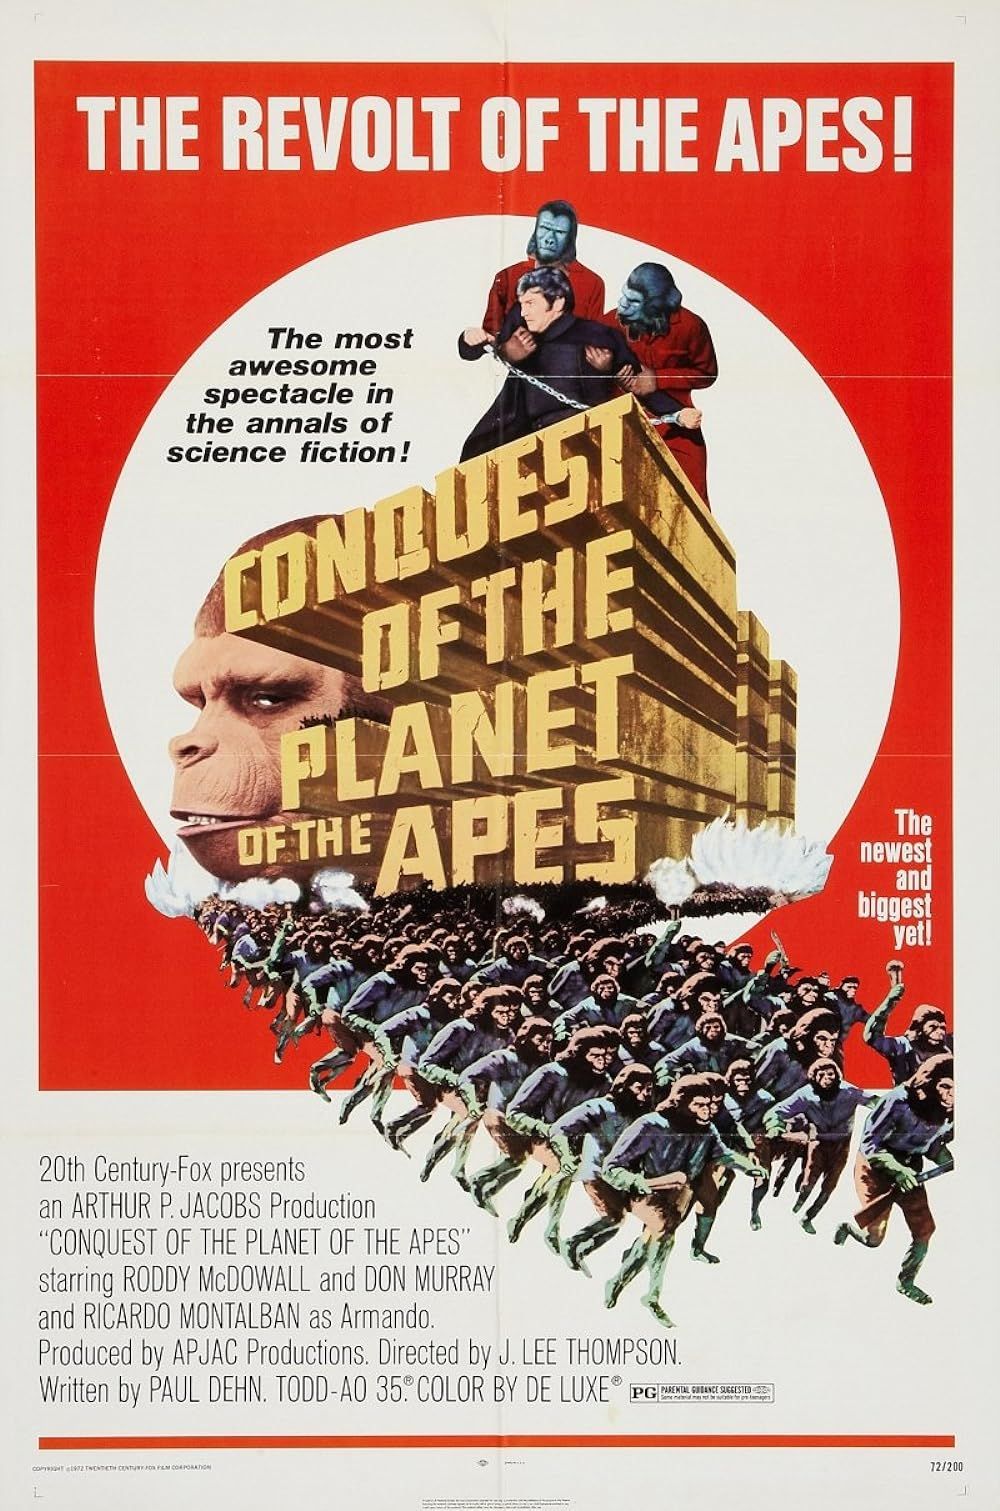 Illustrated Conquest Of The Planet Of The Apes official poster featuring an army of apes.